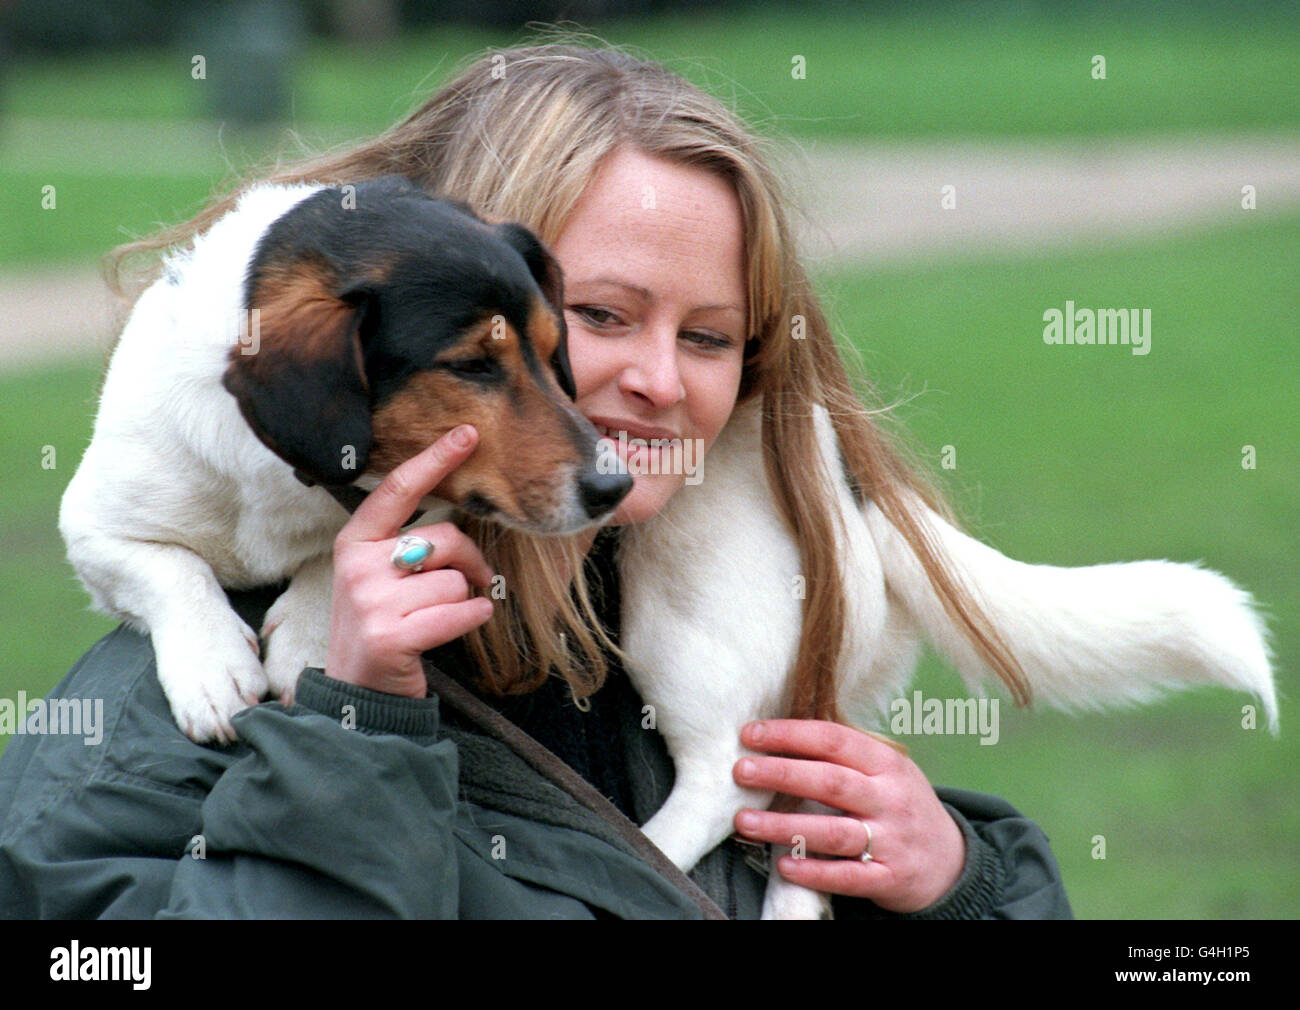 Julie Tottman, with her dog Kyte, at the launch of Crufts 1999, in London's Green Park. Kyte is one of 500 cross-breeds who will compete in obedience and agility competitions at the premier dog show, which will be held at the Birmingham NEC. Stock Photo